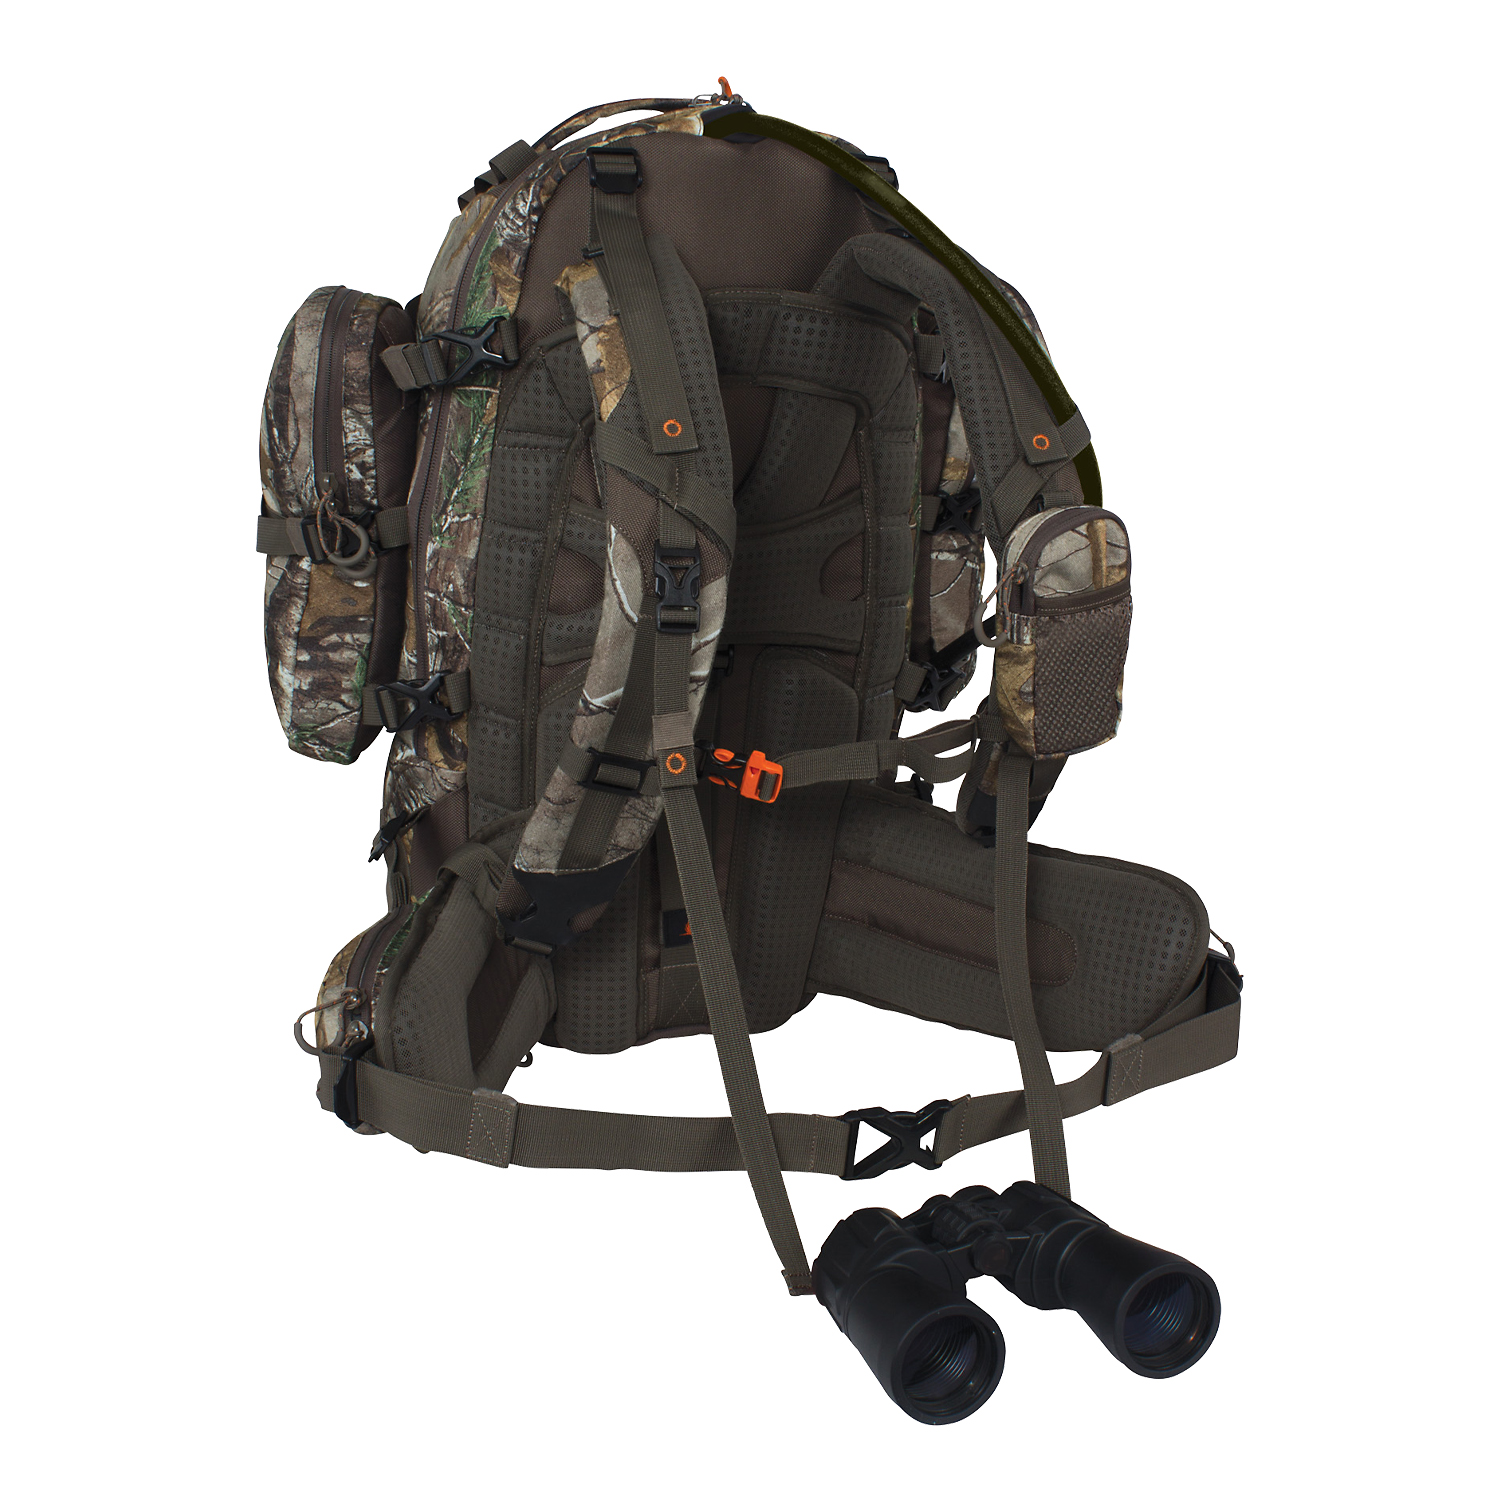 TIMBER HAWK 2 ltr. Backpacking Backpack Storage, Camouflage - image 3 of 5